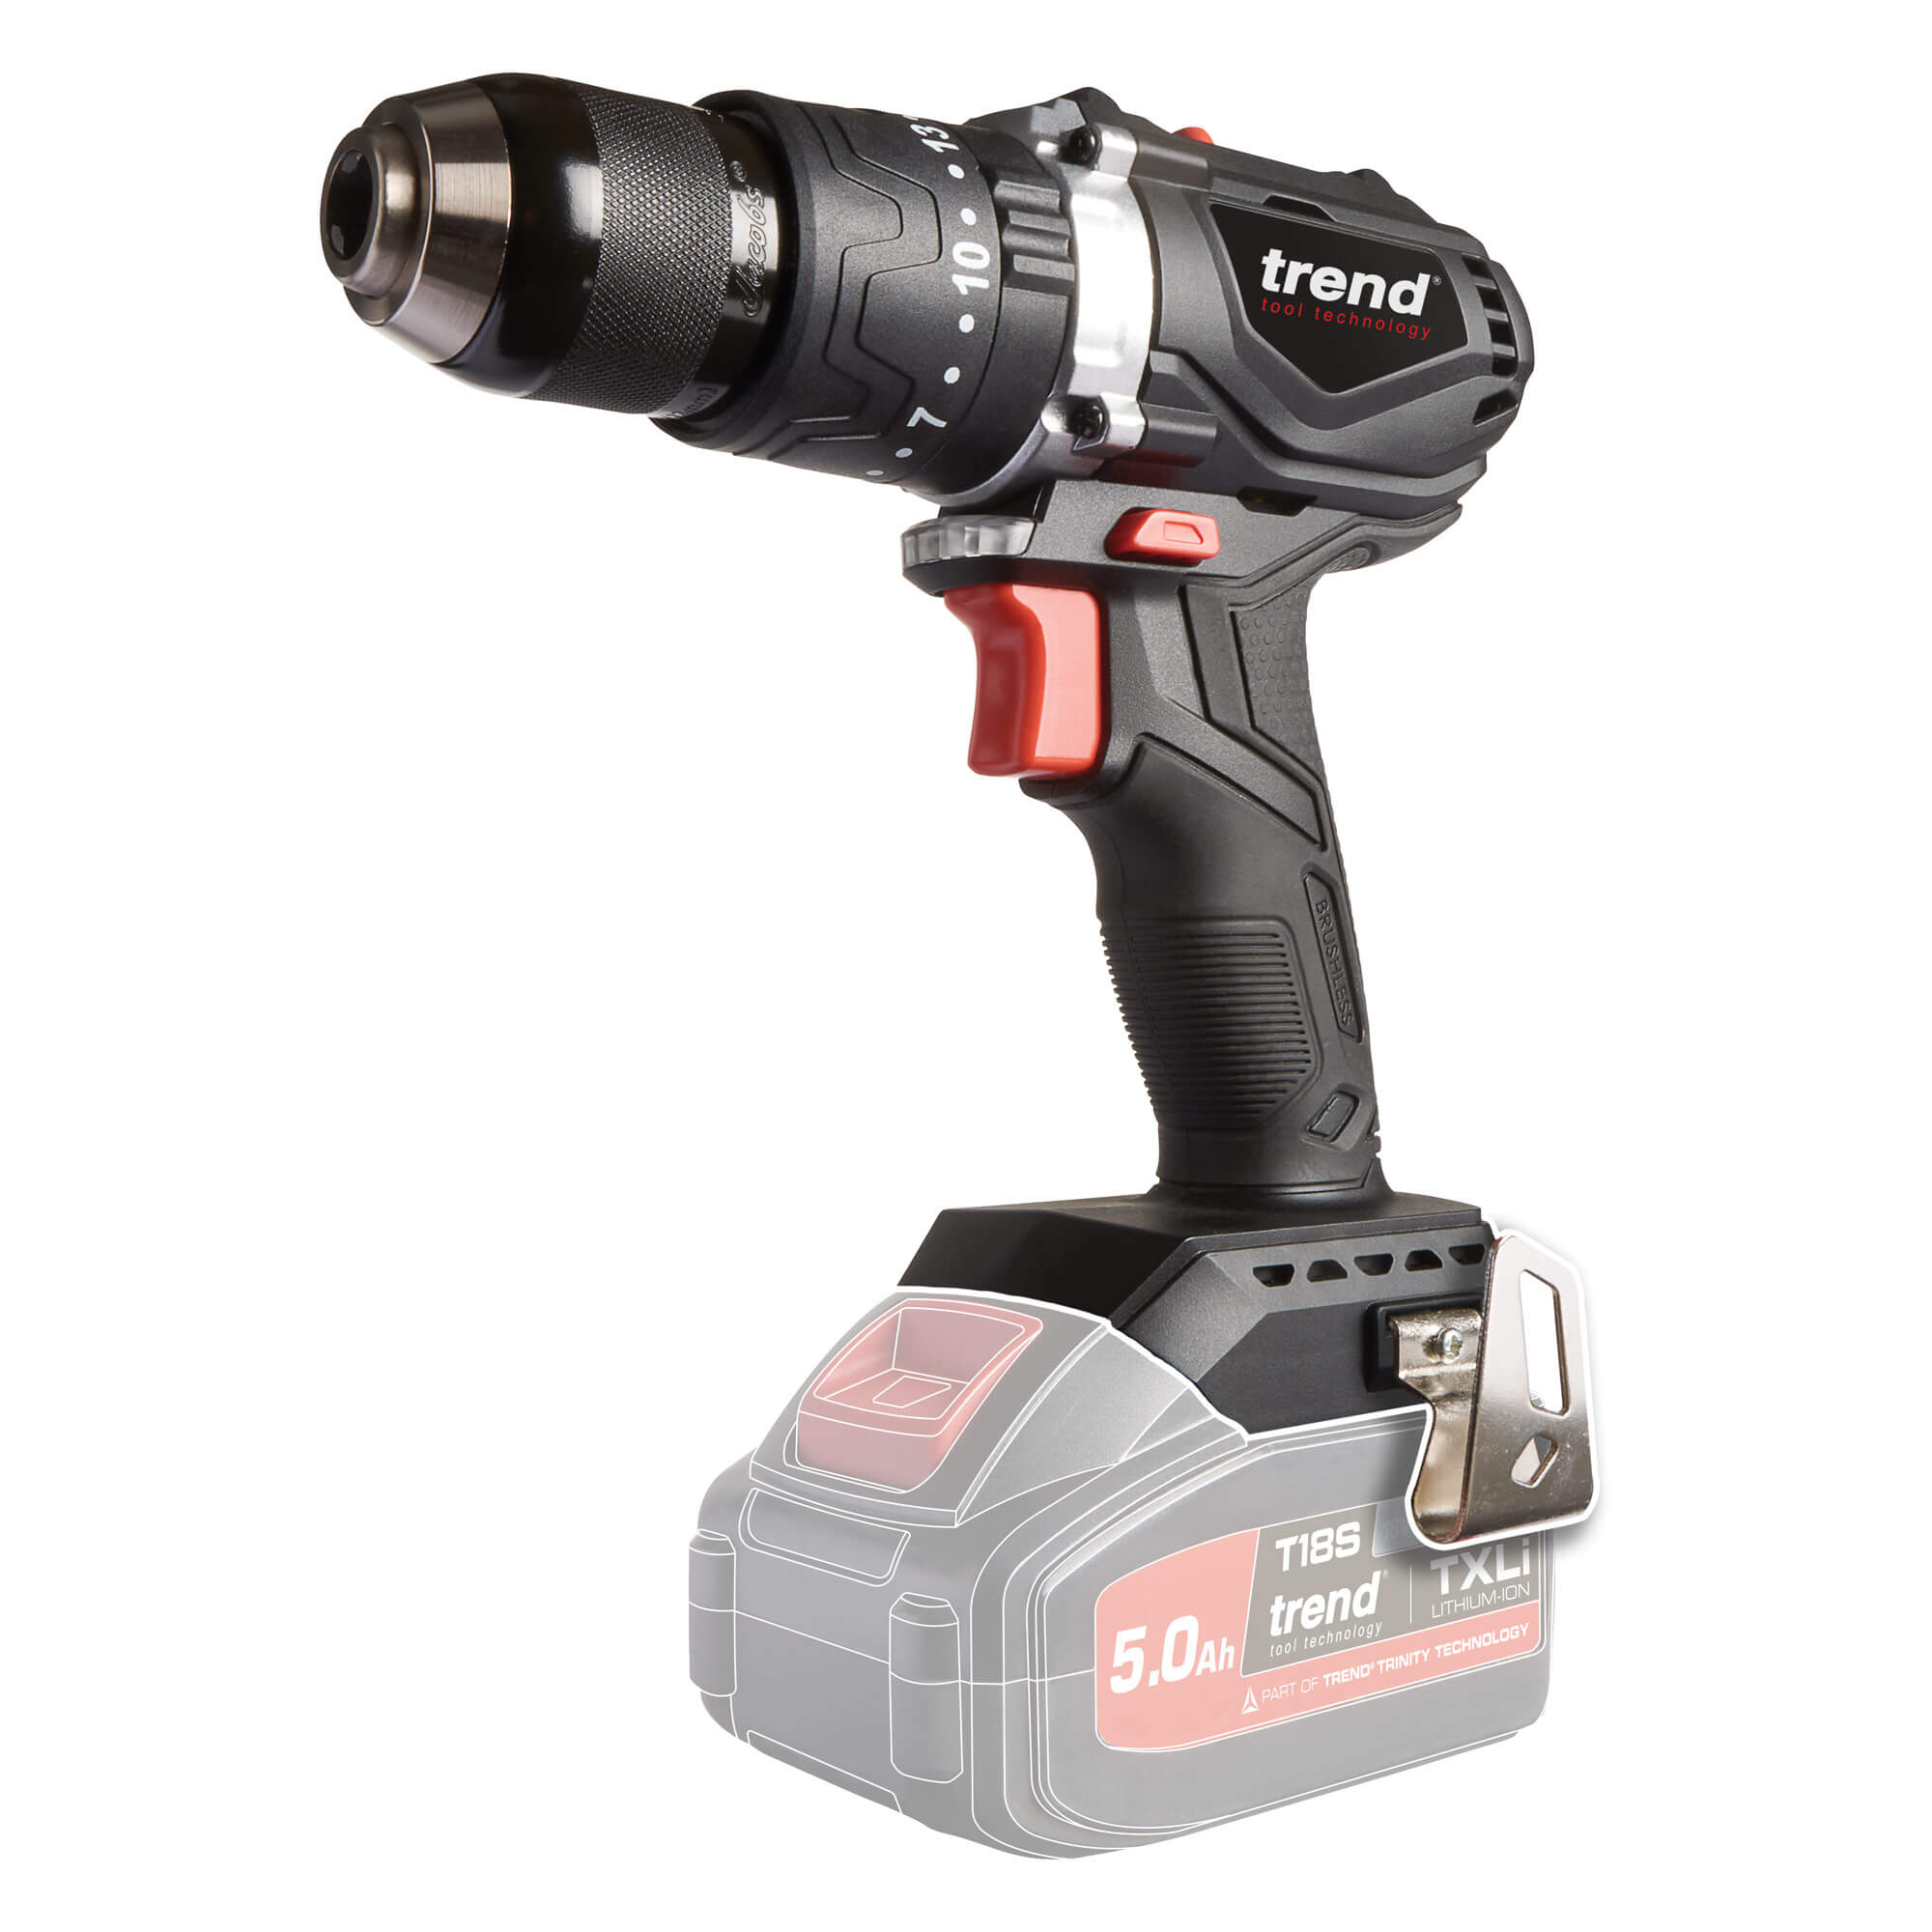 Photo of Trend T18s/cdb 18v Cordless Brushless Combi Drill No Batteries No Charger No Case